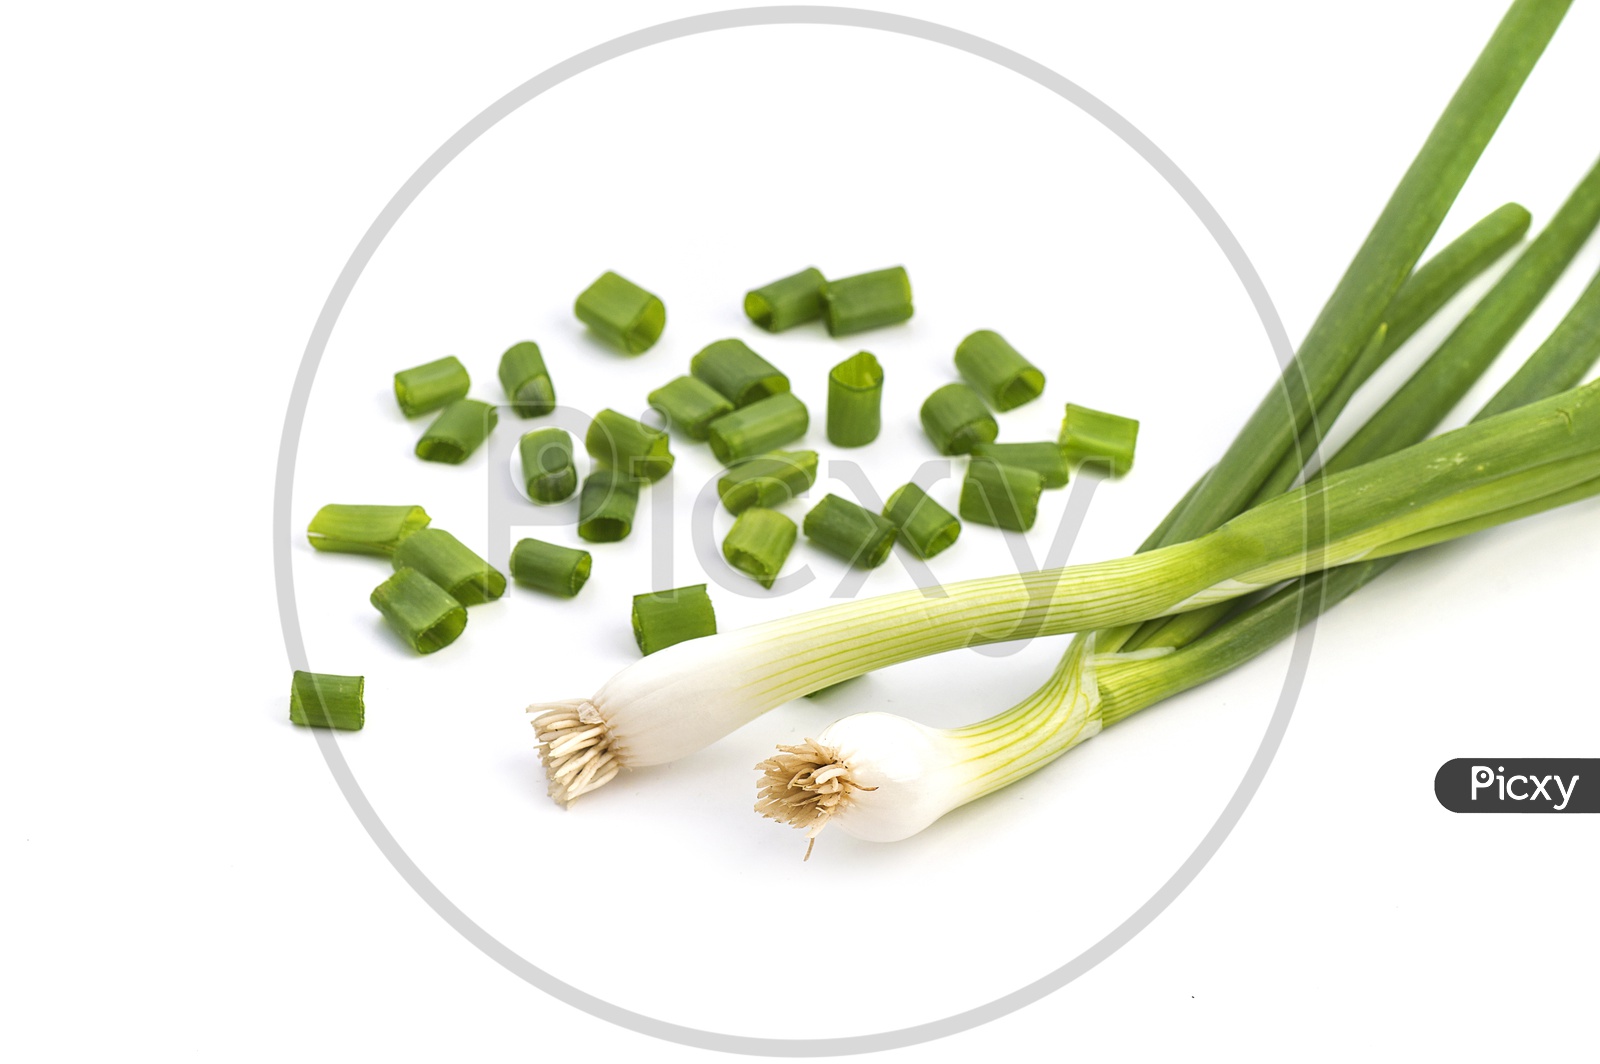 Fresh And Finely Chopped Green Spring Onions on an Isolated White Background